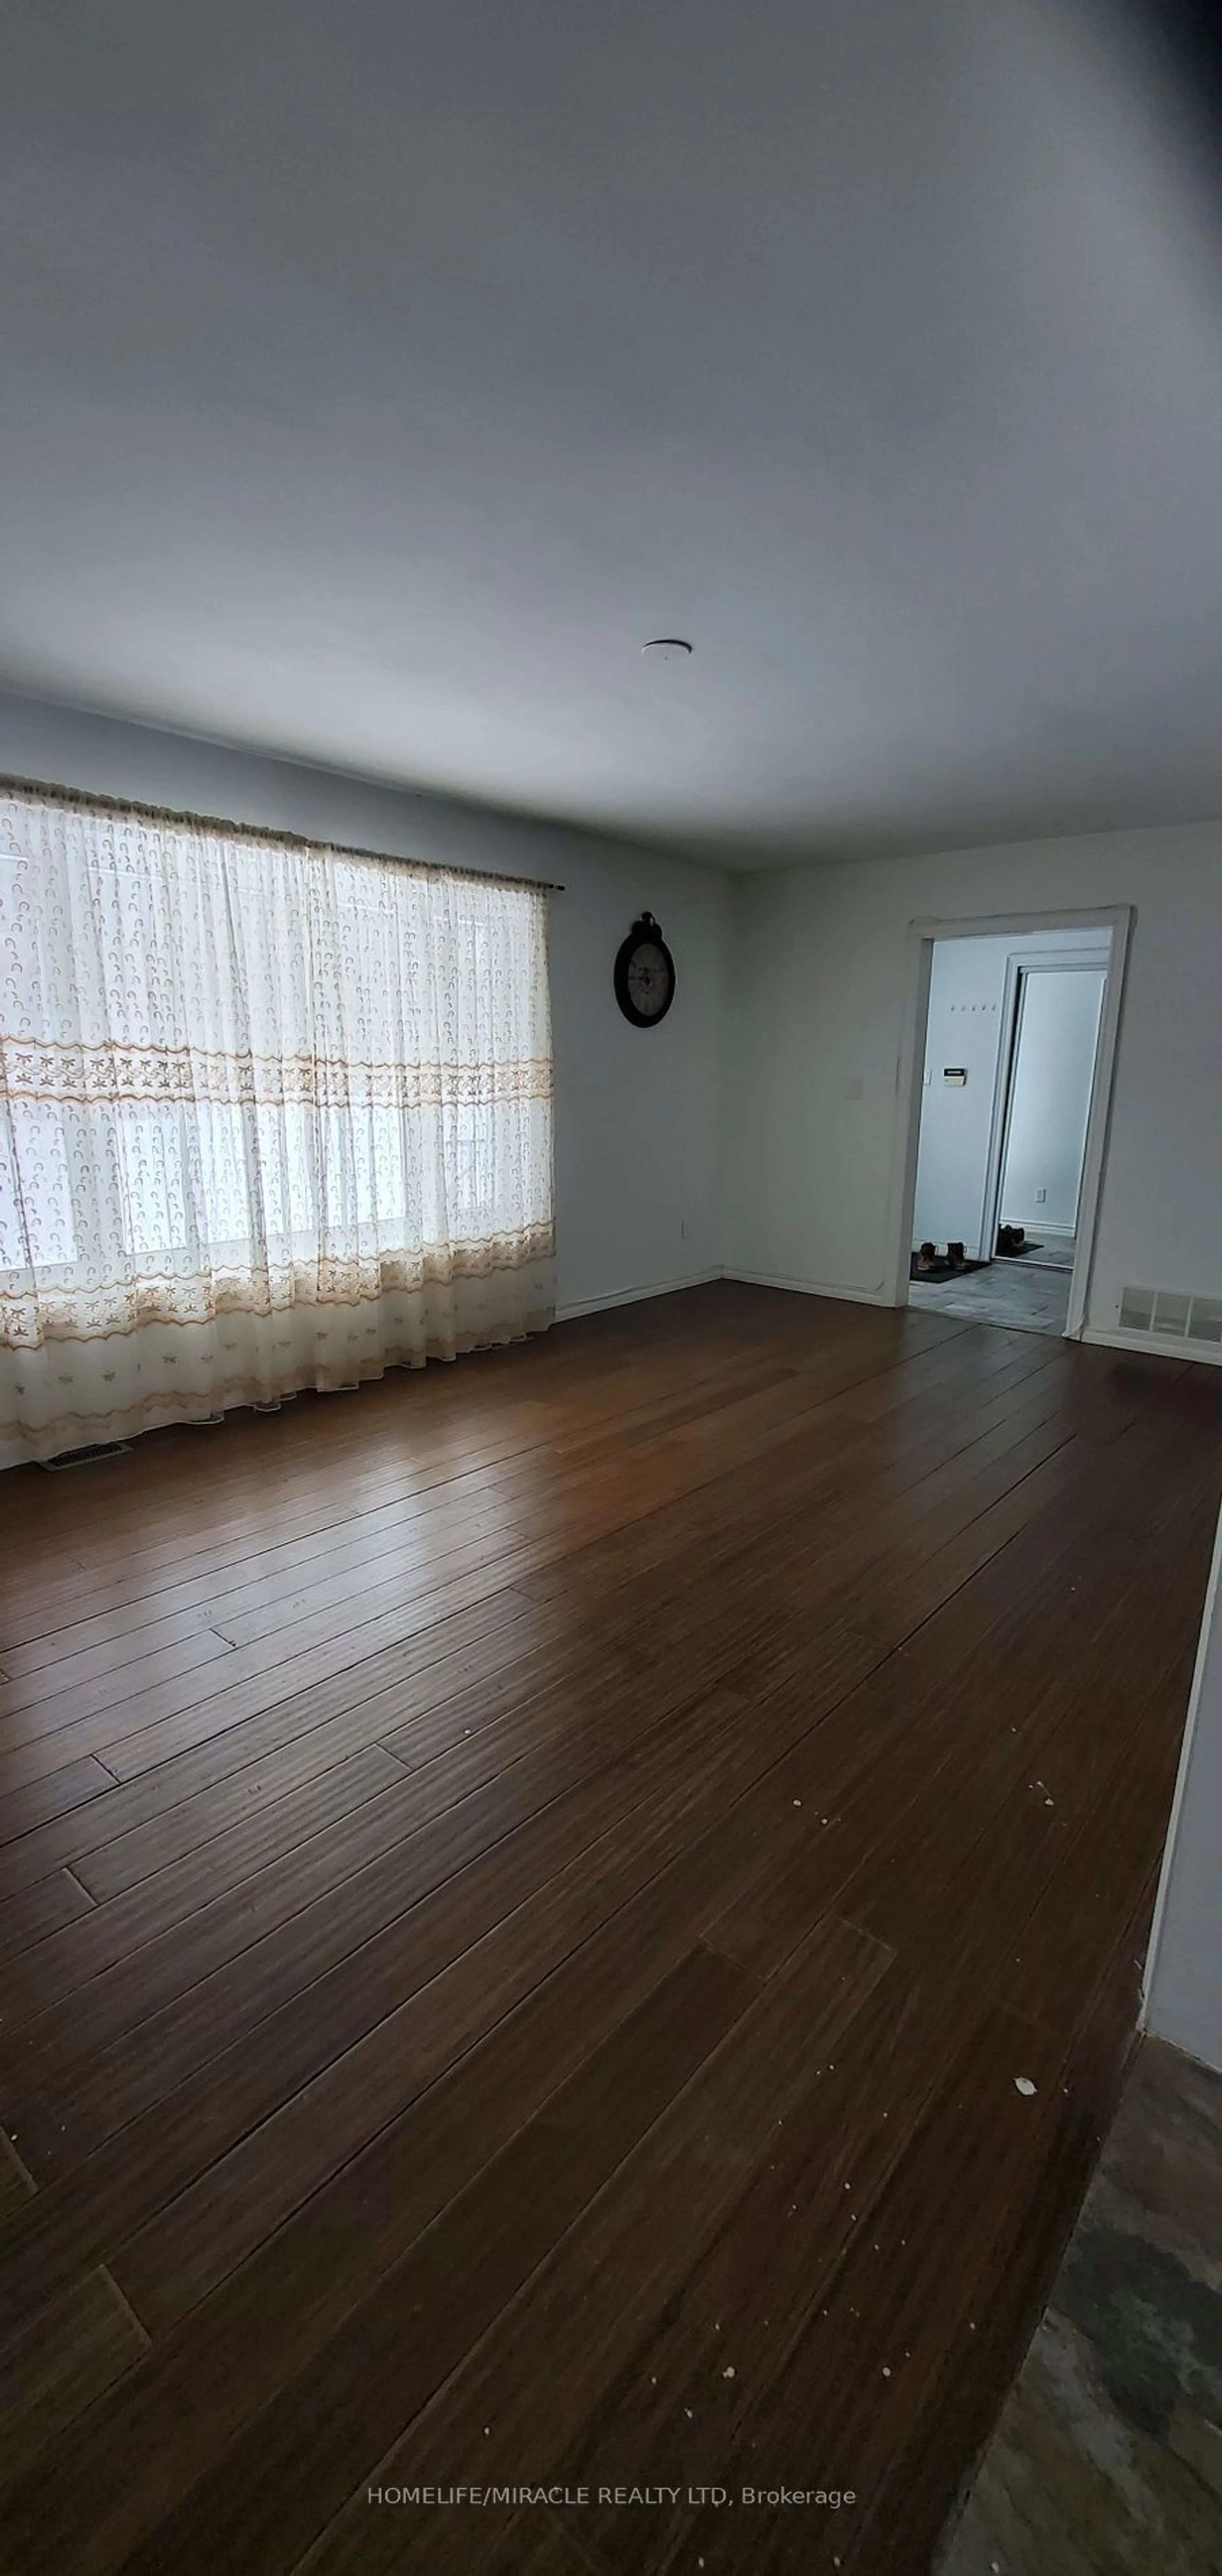 A pic of a room for 544 Gillmoss Rd, Pickering Ontario L1W 3J4